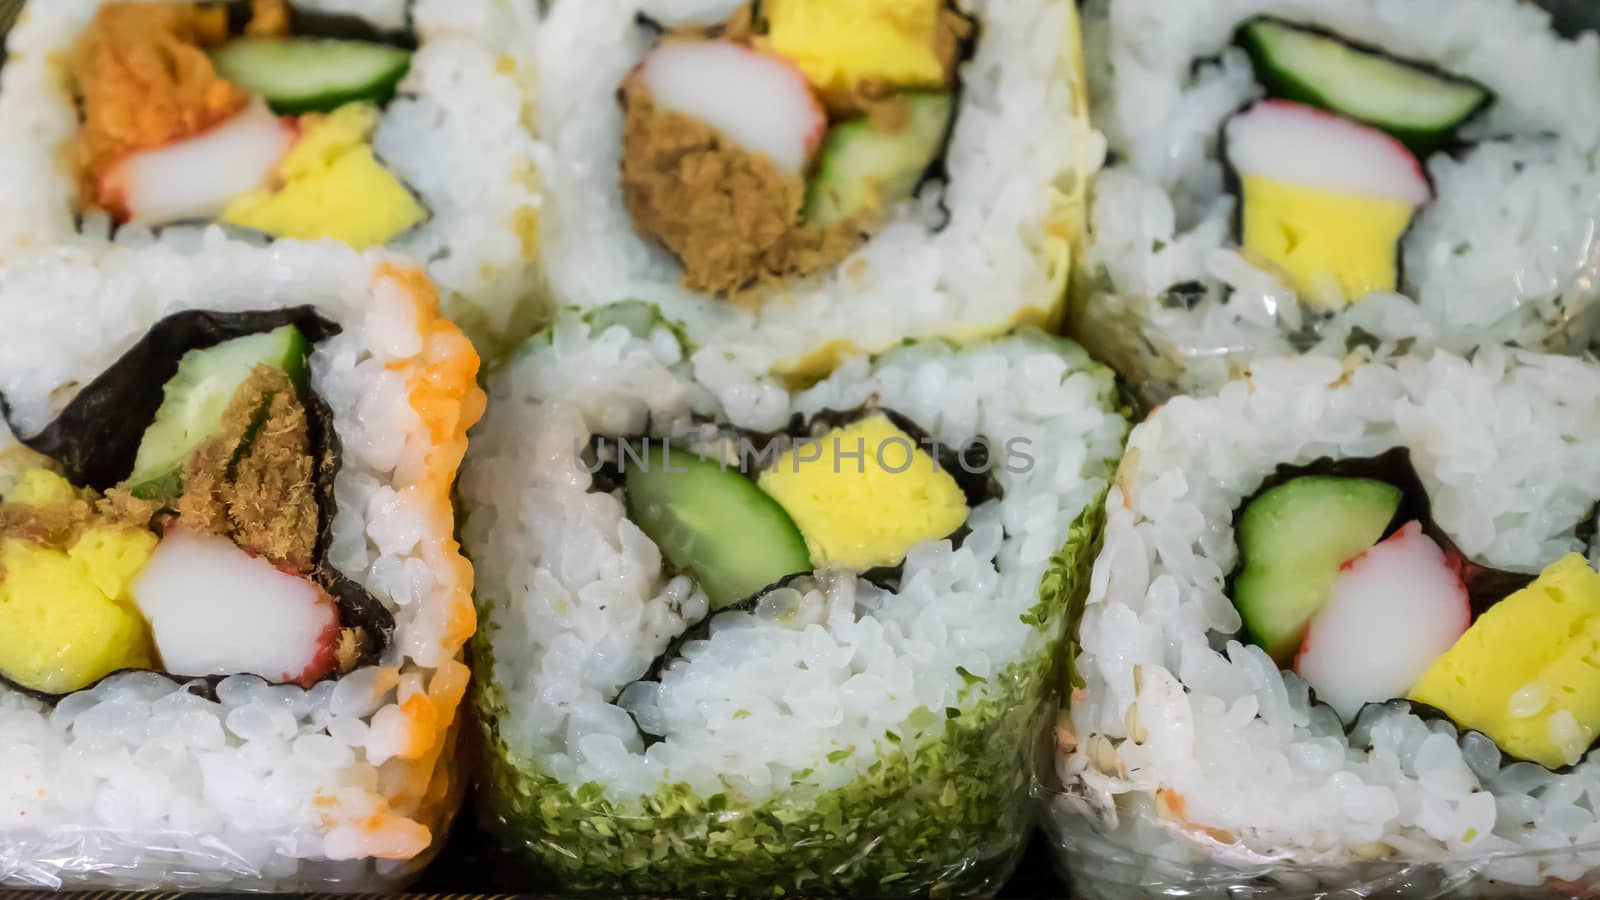 The close up of Japanese futomaki (sushi roll).